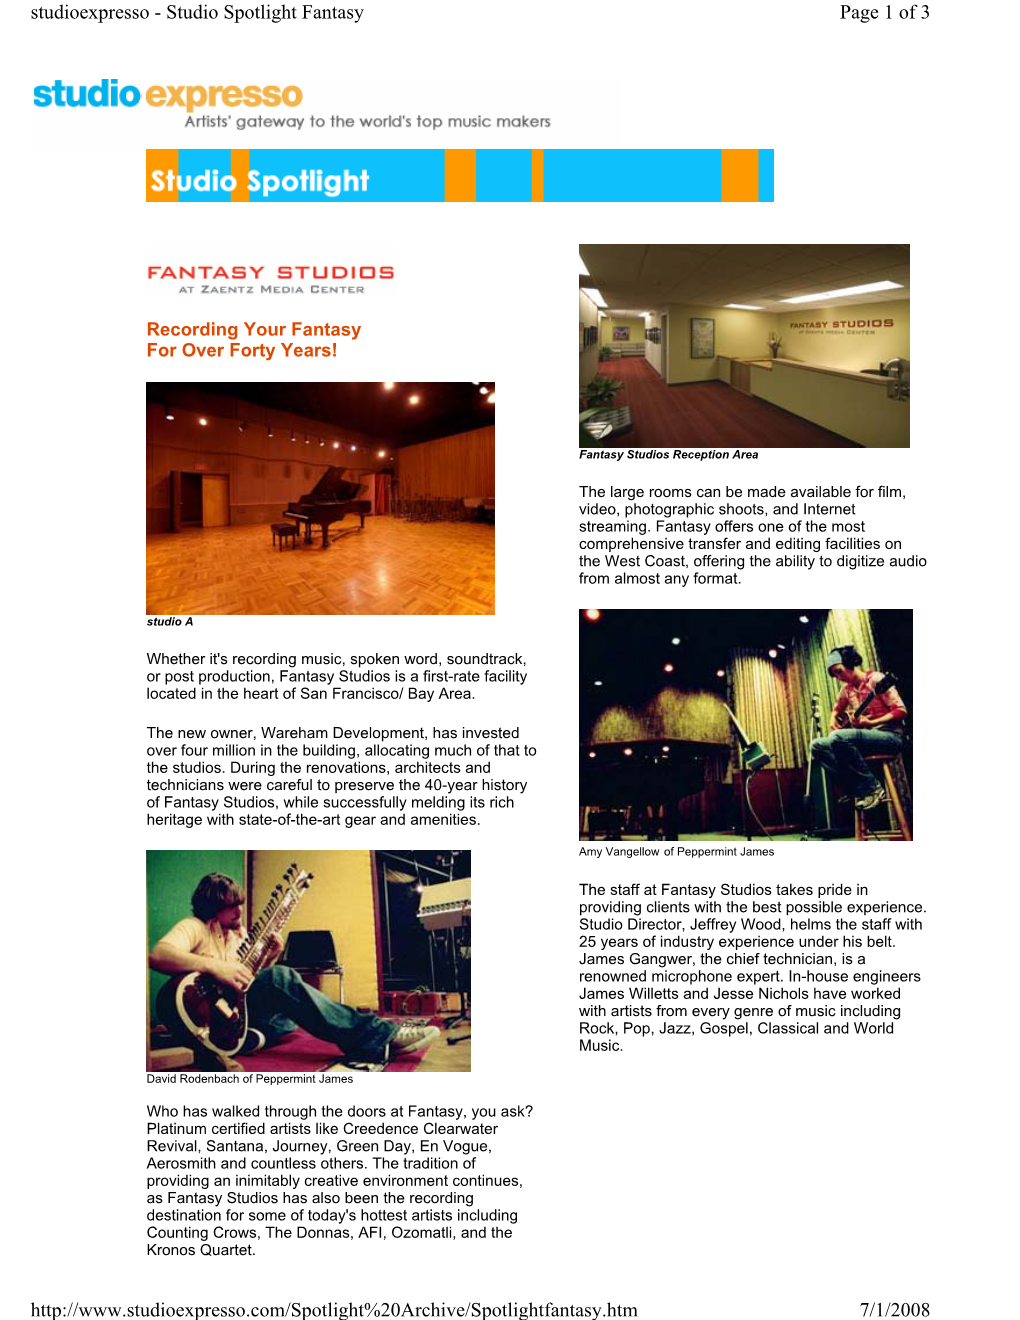 Page 1 of 3 Studioexpresso